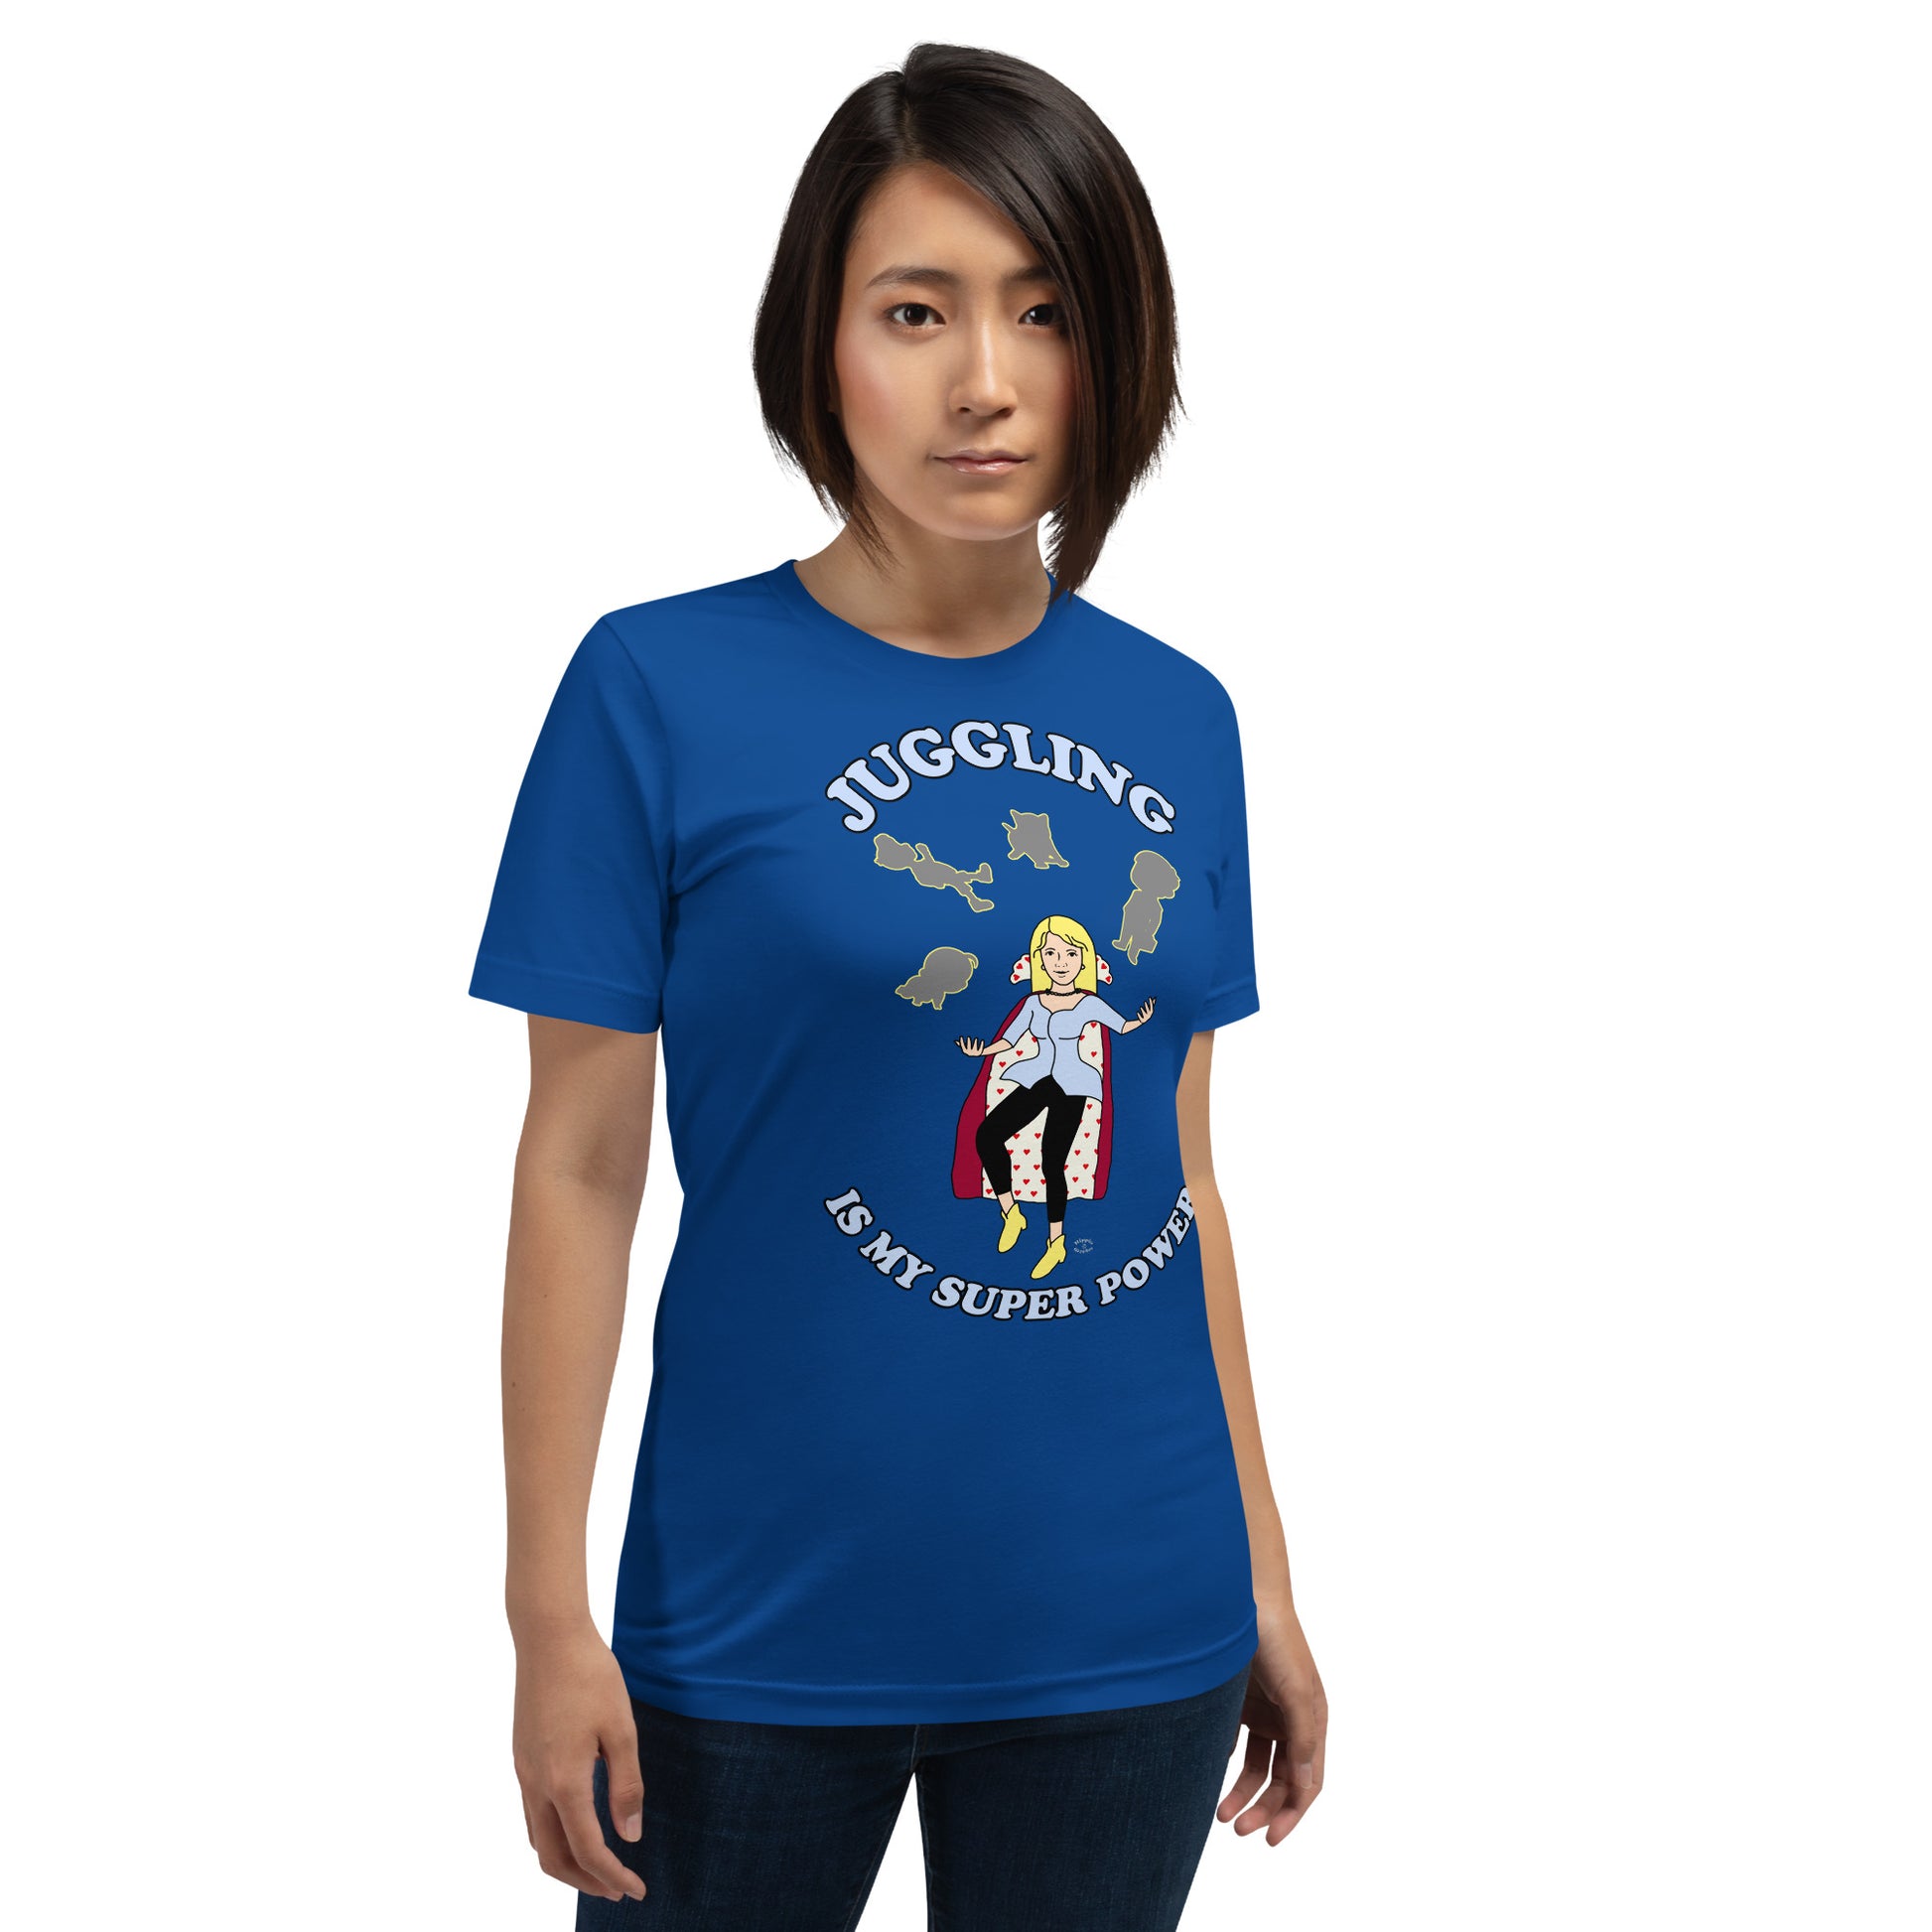 A women wearing a unisex short sleeve tshirt which has on the front a cartoon women in a cape juggling her family like a jester and the text Juggling Is My Super Power - front - royal blue